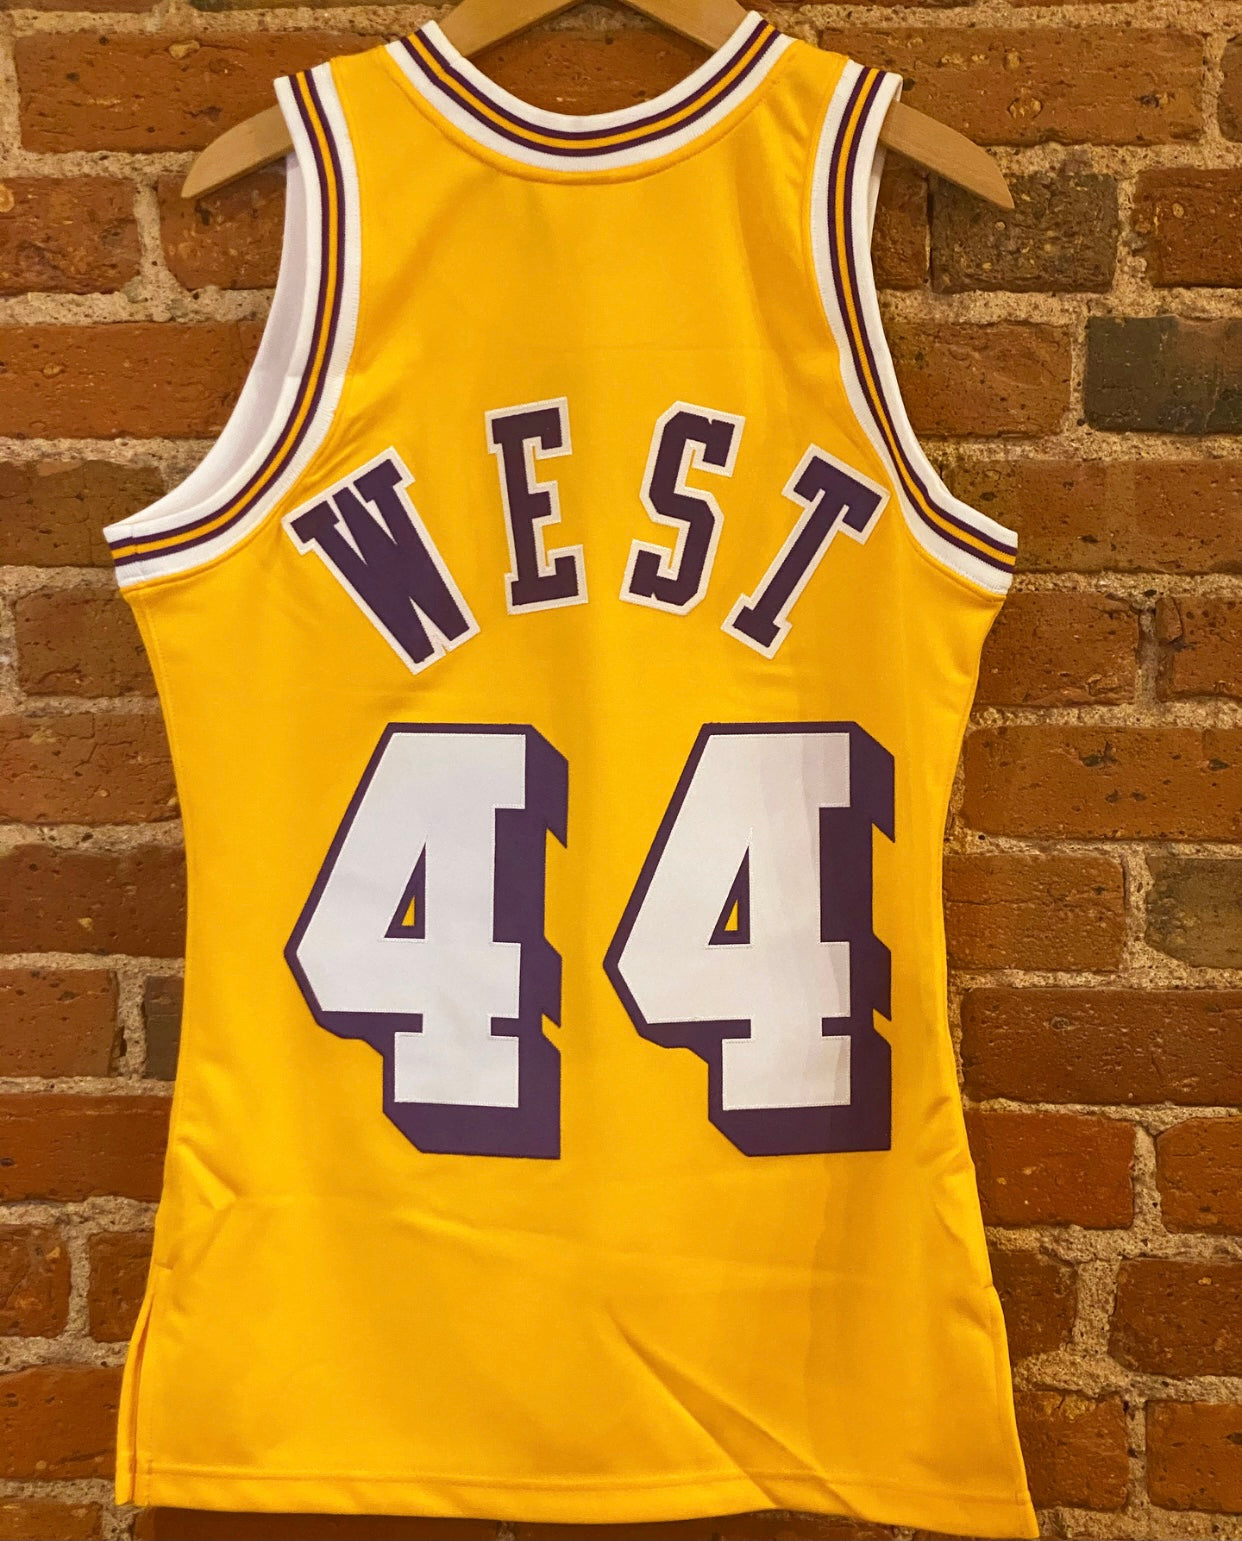 DREAMER x Mitchell & Ness Los Angeles Lakers Jersey